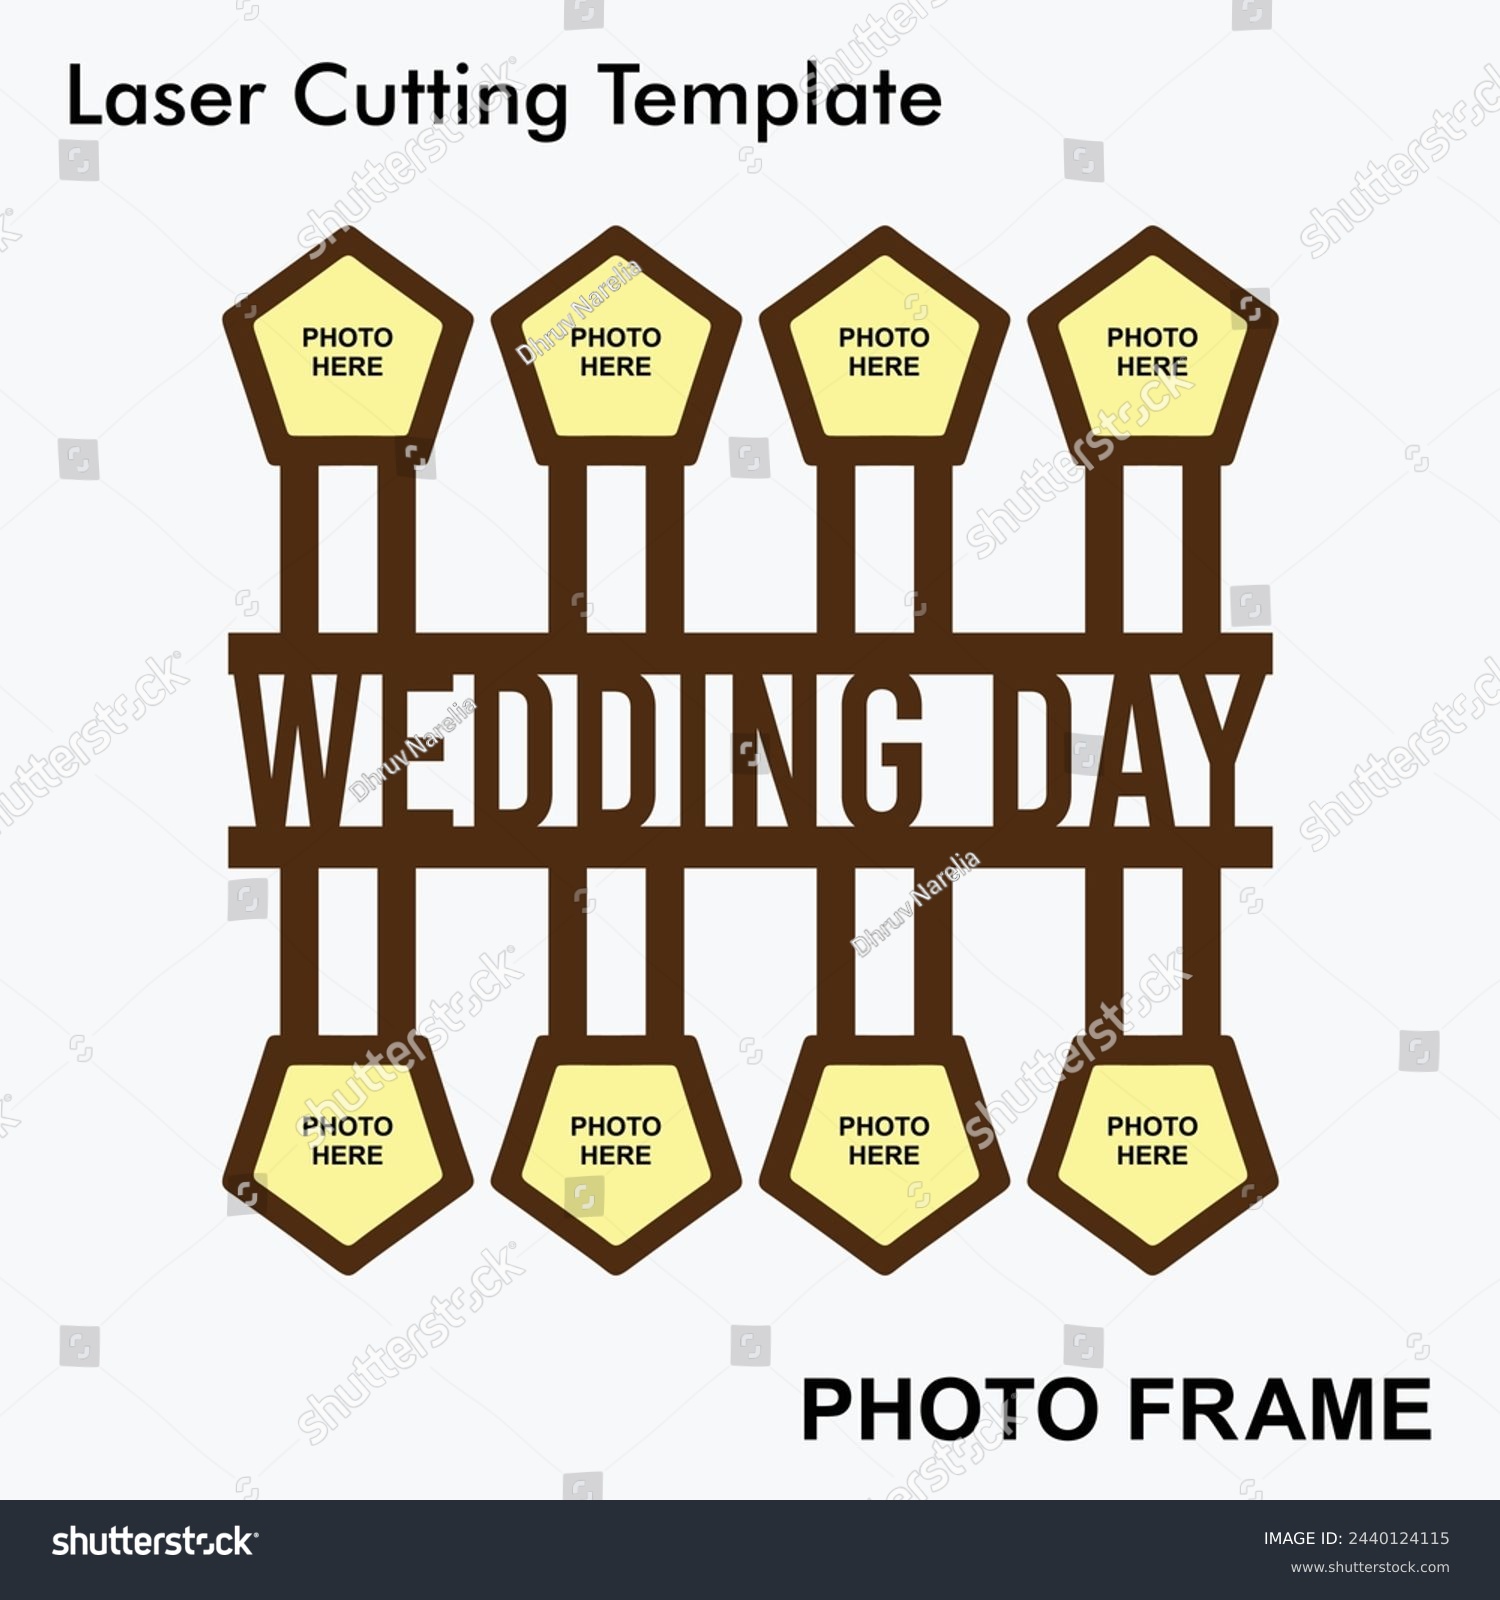 SVG of Wedding Day laser cut photo frame with 8 photo. Home decor wooden sublimation frame template. Suitable for wedding gifts. Laser cut photo frame template design for mdf and acrylic cutting. svg